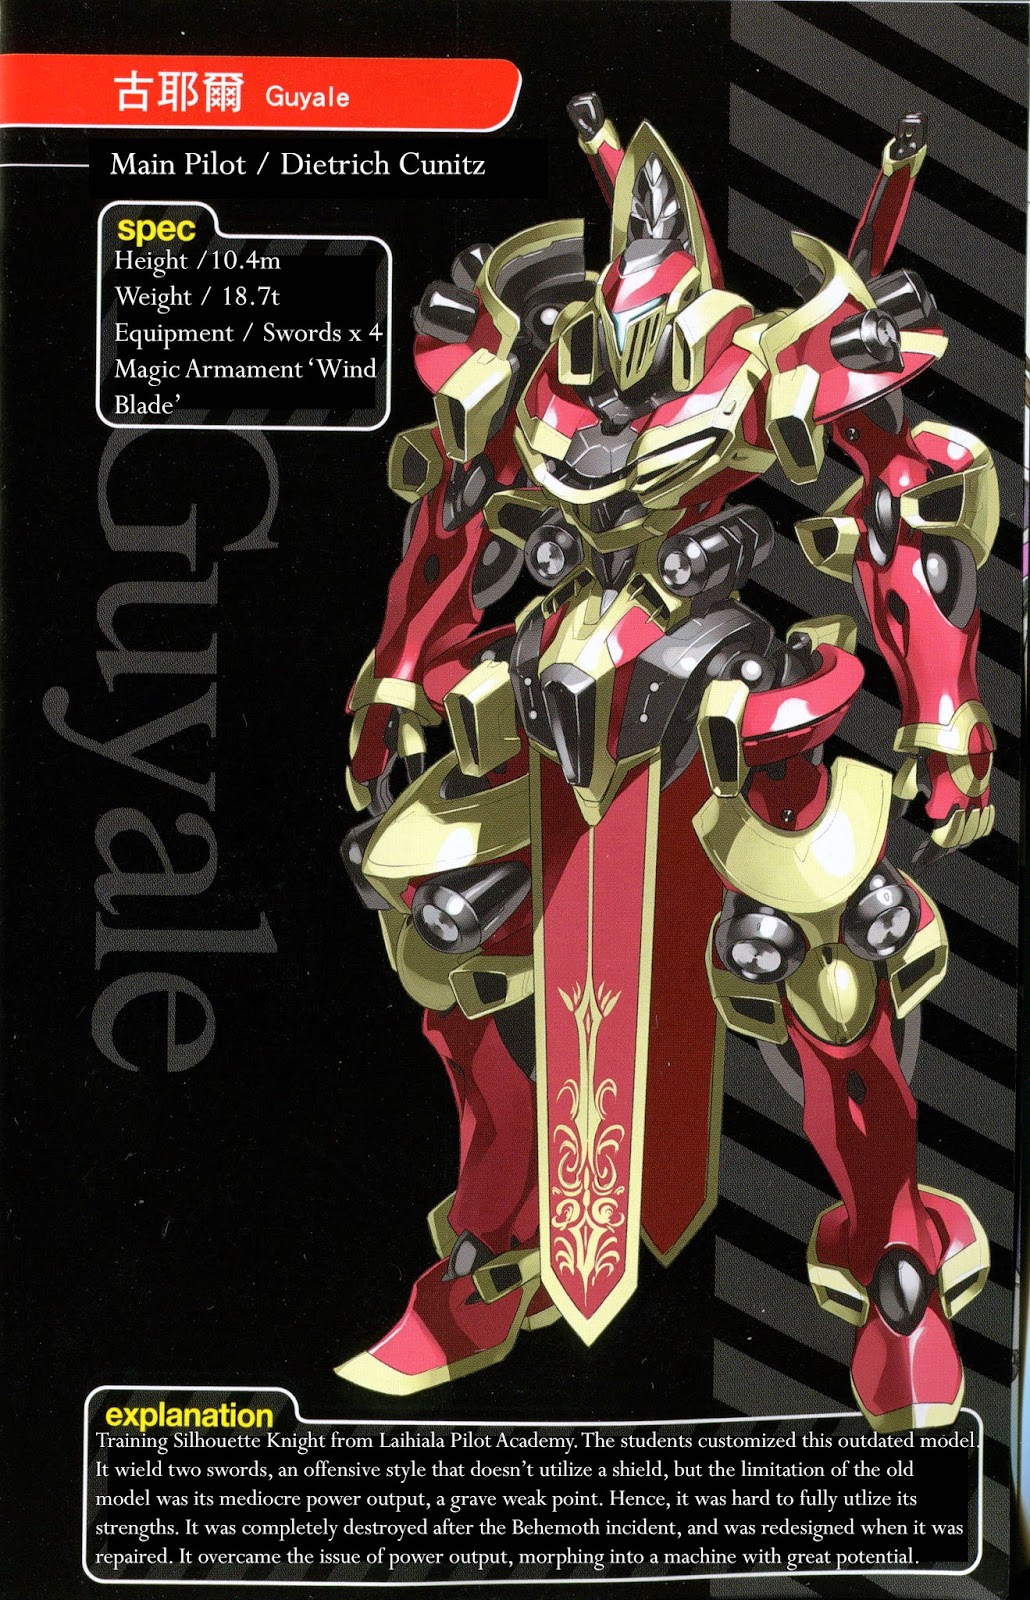 Do we have calcs for Silhouette Knights from Knight's & Magic?